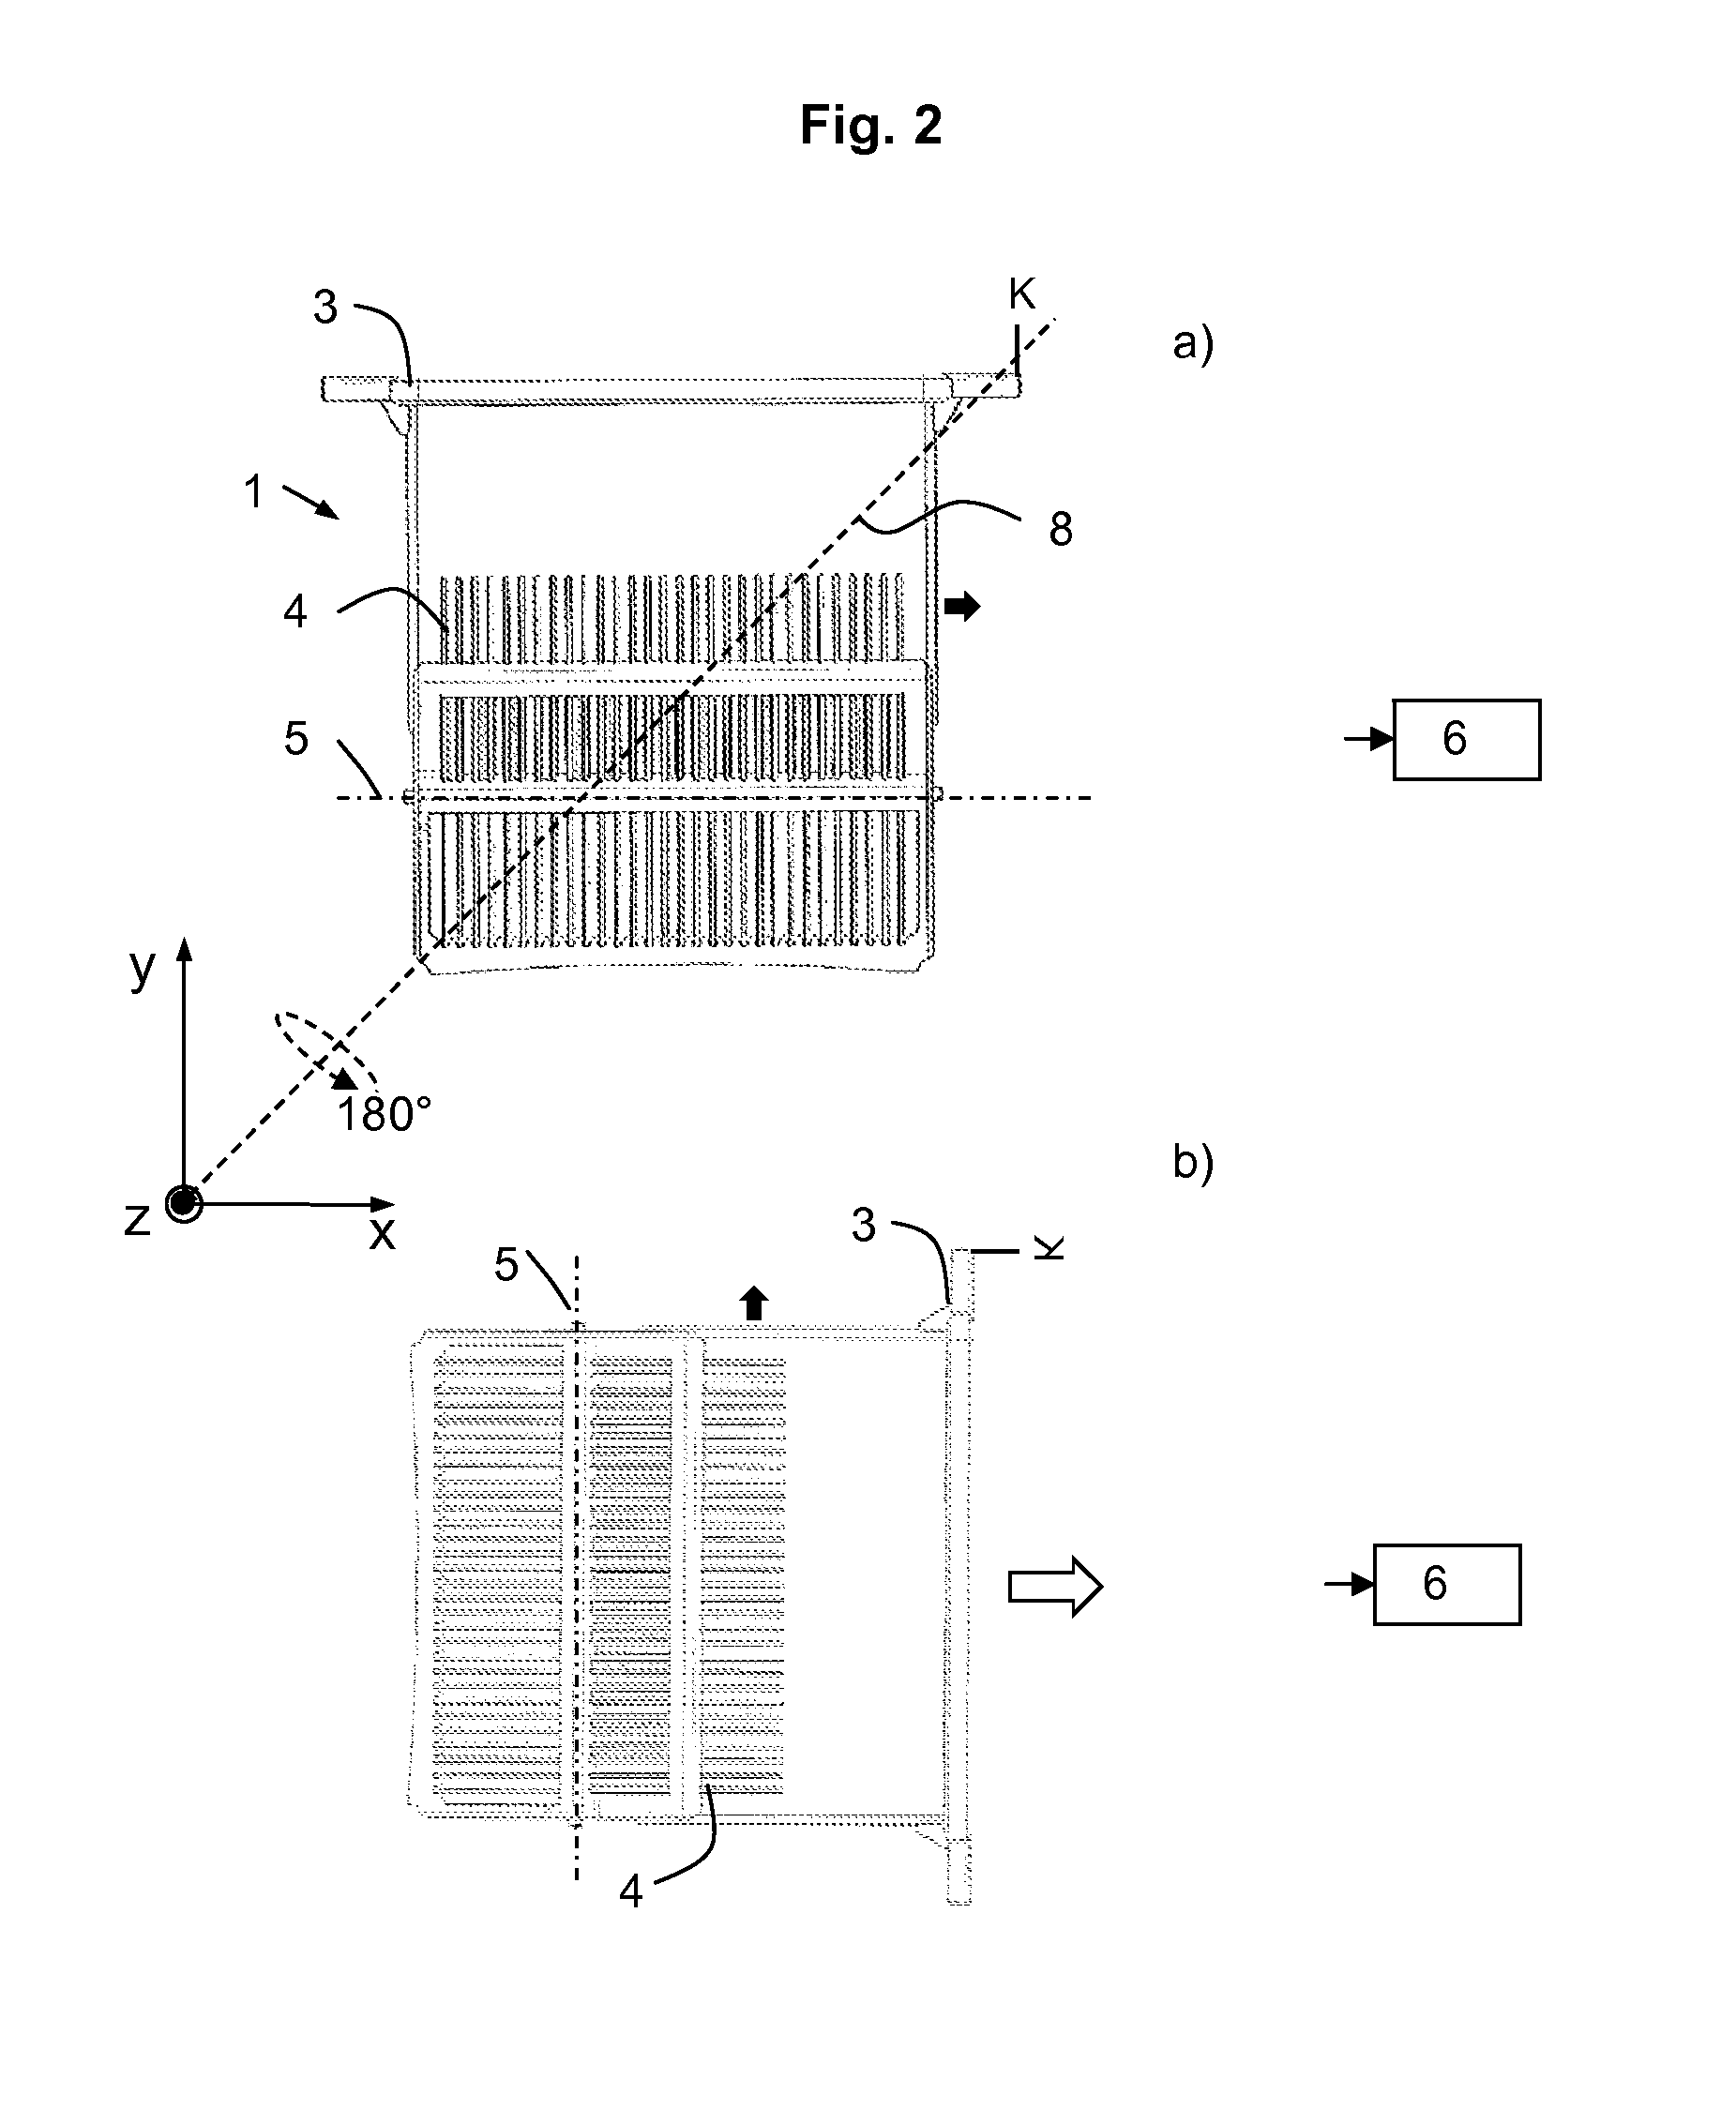 Apparatus and method for turning racks